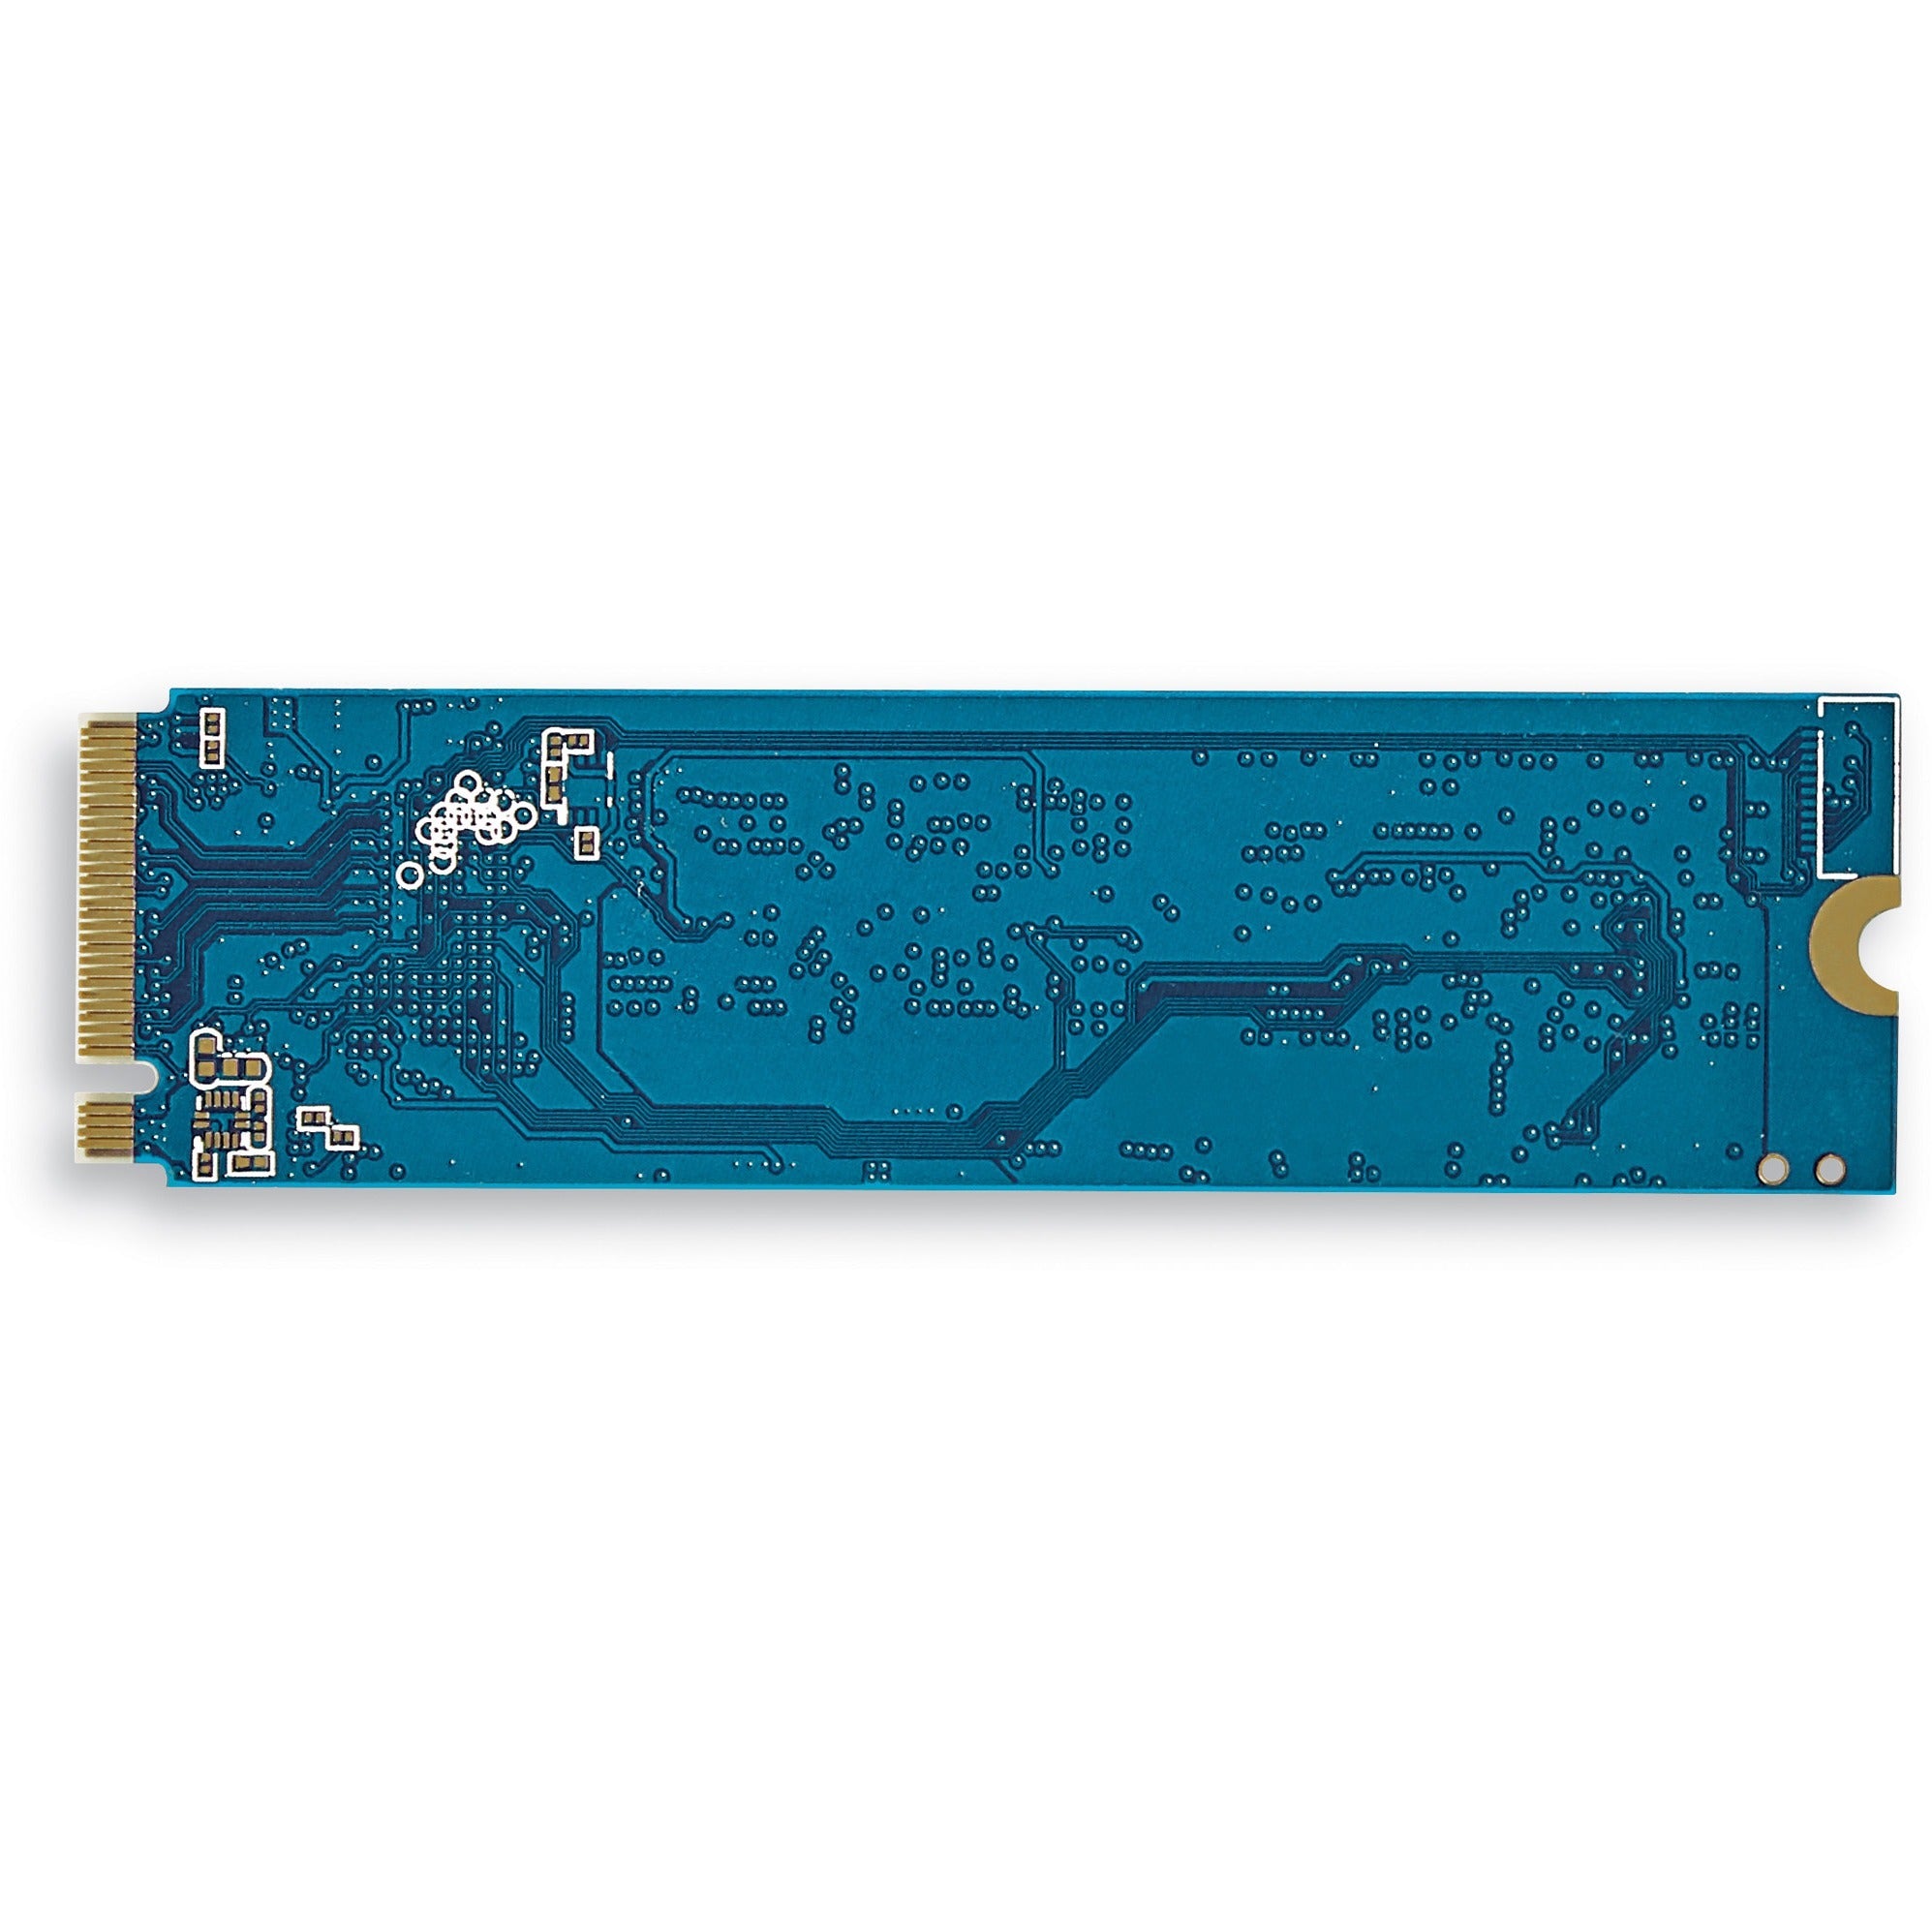 verbatim-vi3000-1-tb-solid-state-drive-m2-2280-internal-pci-express-nvme-pci-express-nvme-30-x4-notebook-desktop-pc-device-supported-600-tb-tbw-3000-mb-s-maximum-read-transfer-rate-5-year-warranty_ver70873 - 2